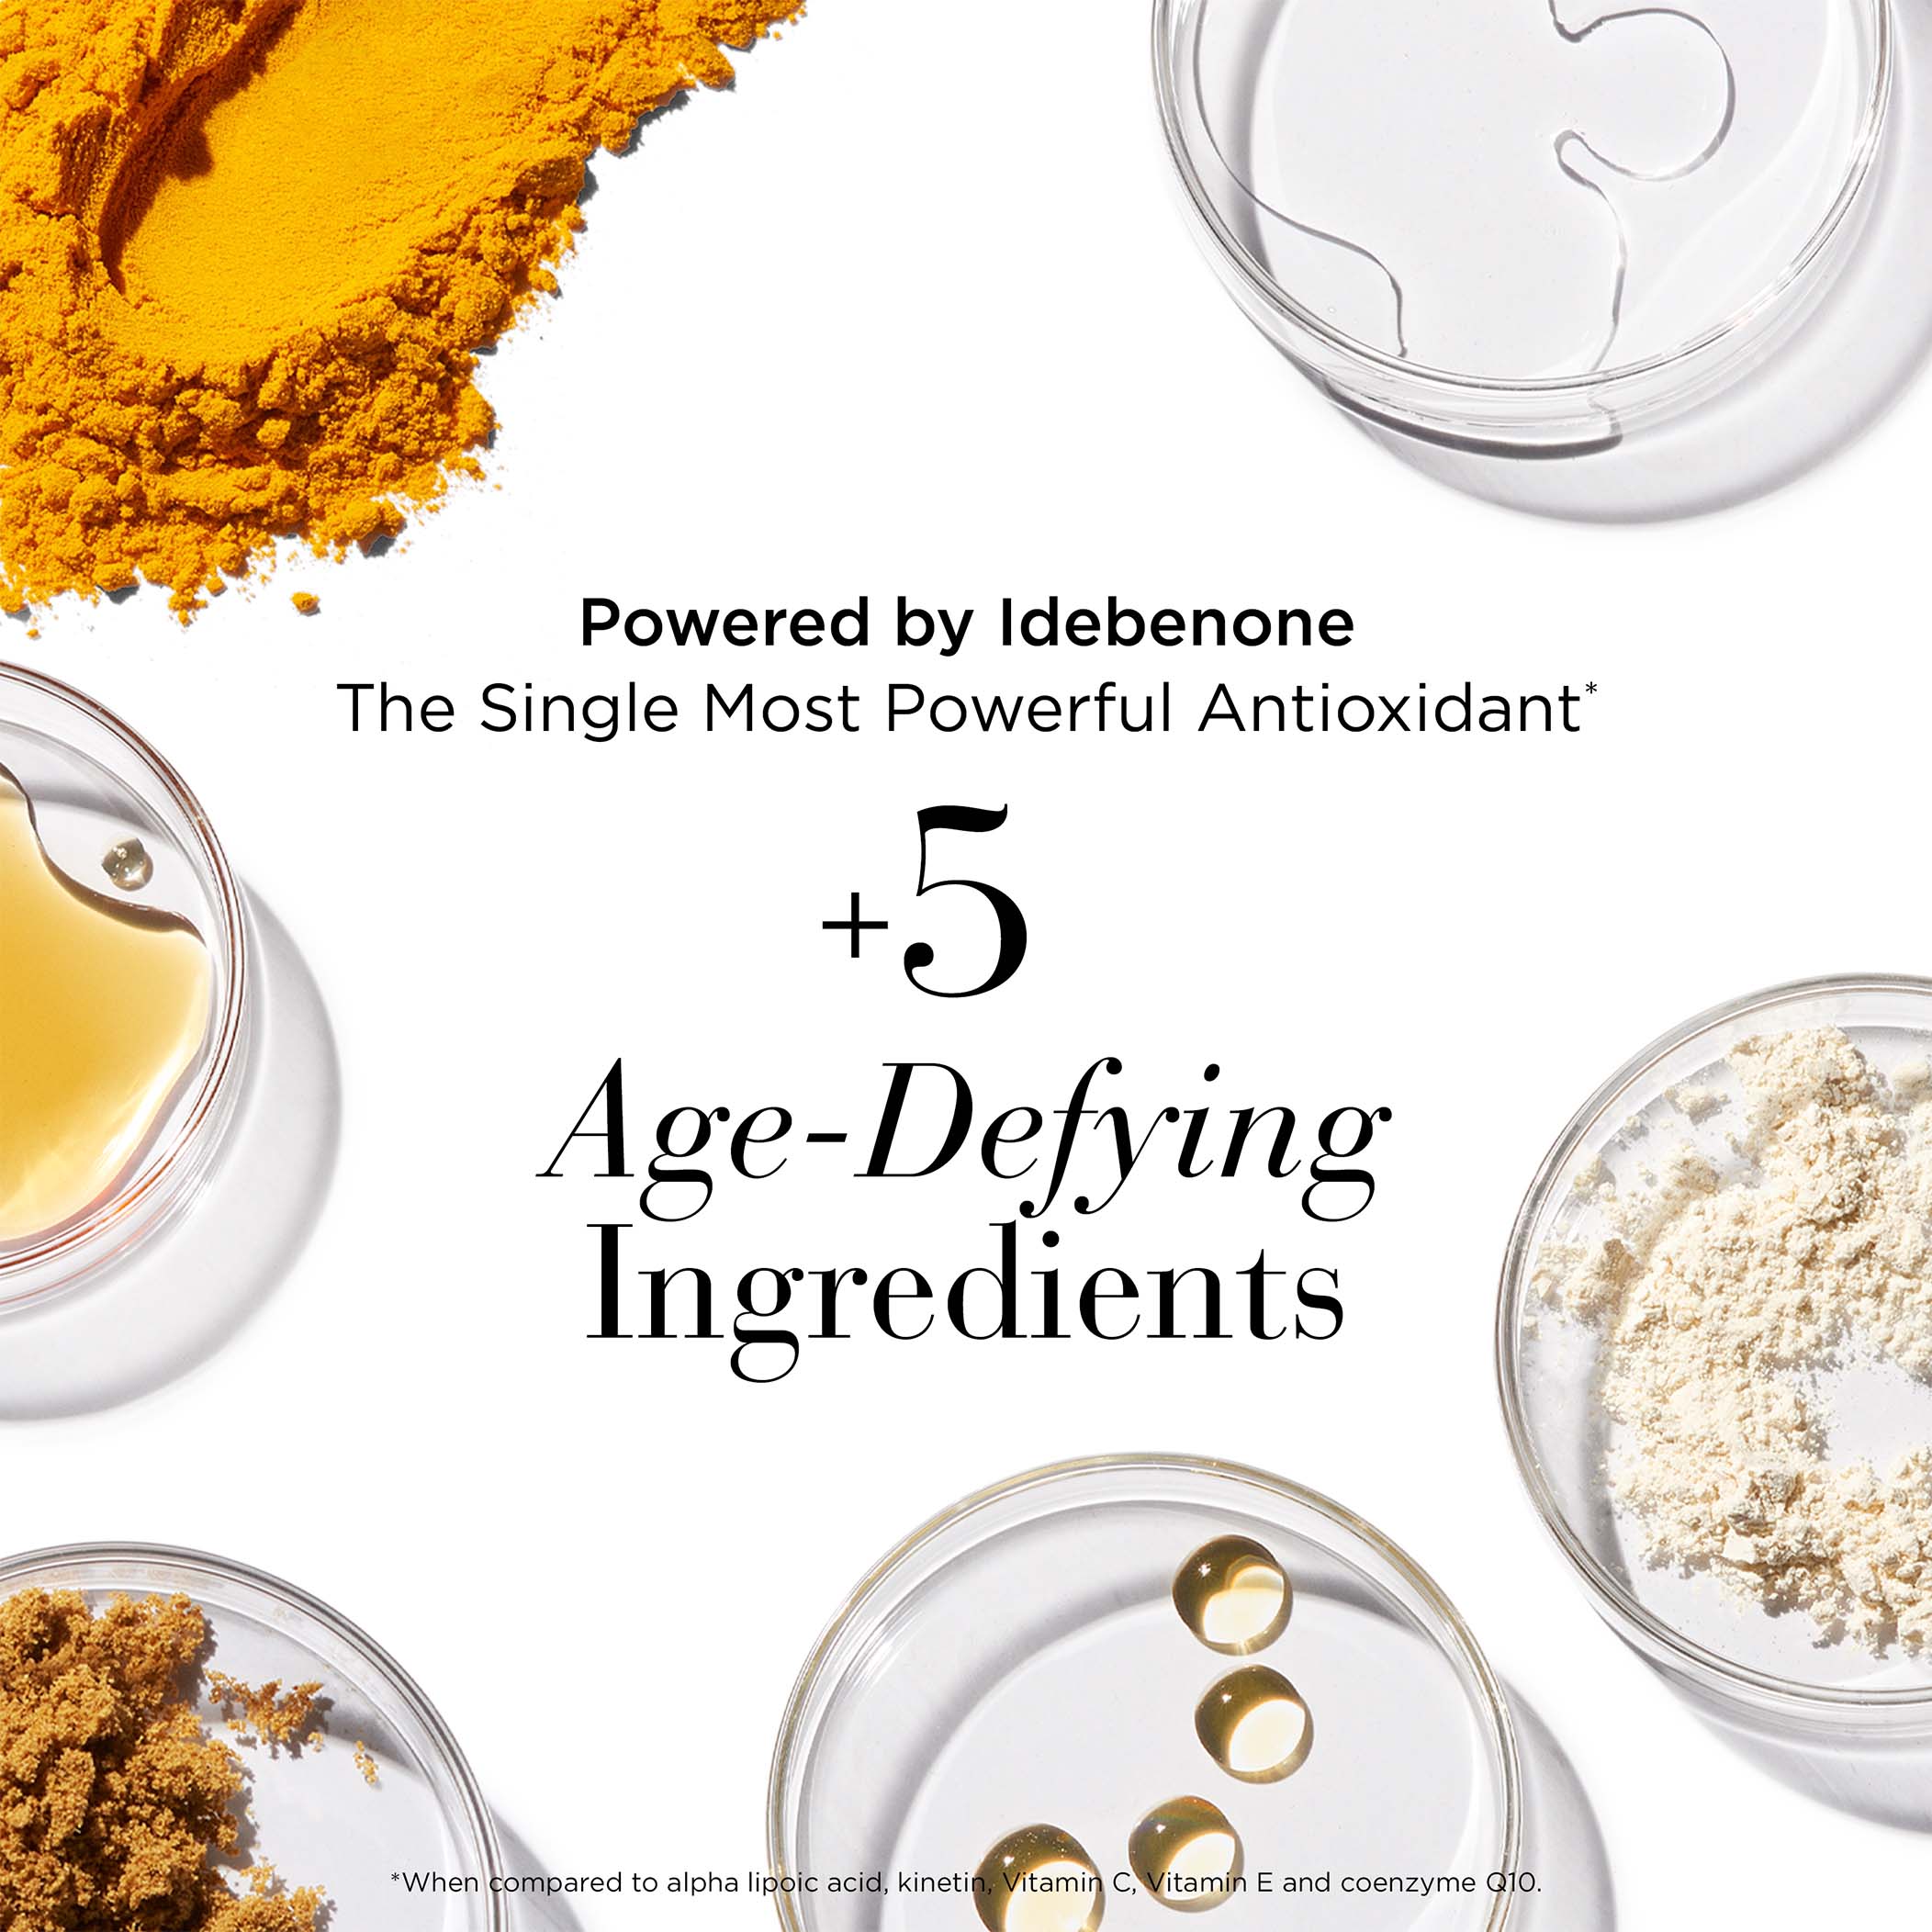 Powered by Idebenone, the single most powerful anti-oxidant + 5 age-defying ingredients when compared to alpha lipoic acid, kinetin, Vitamin C, Vitamin E and coenzyme Q10.